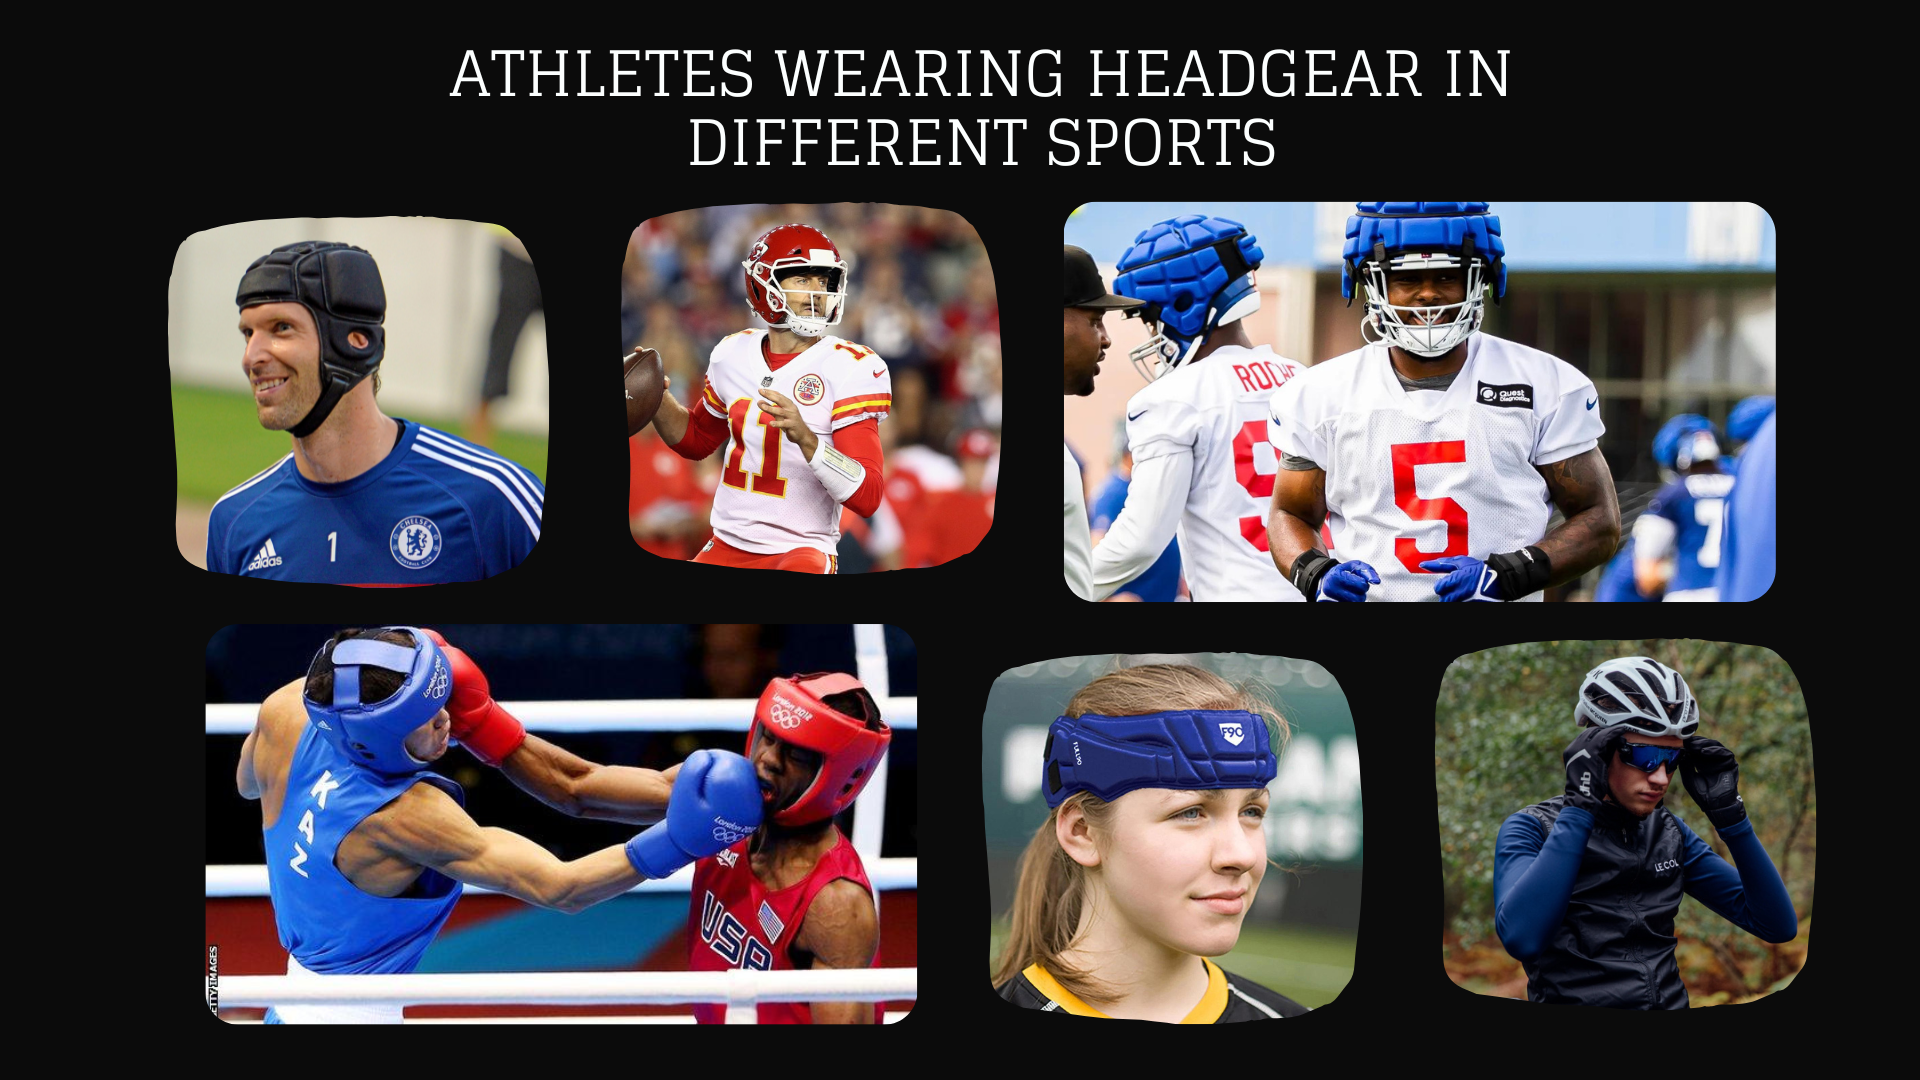 Athletes wearing headgear in different sports